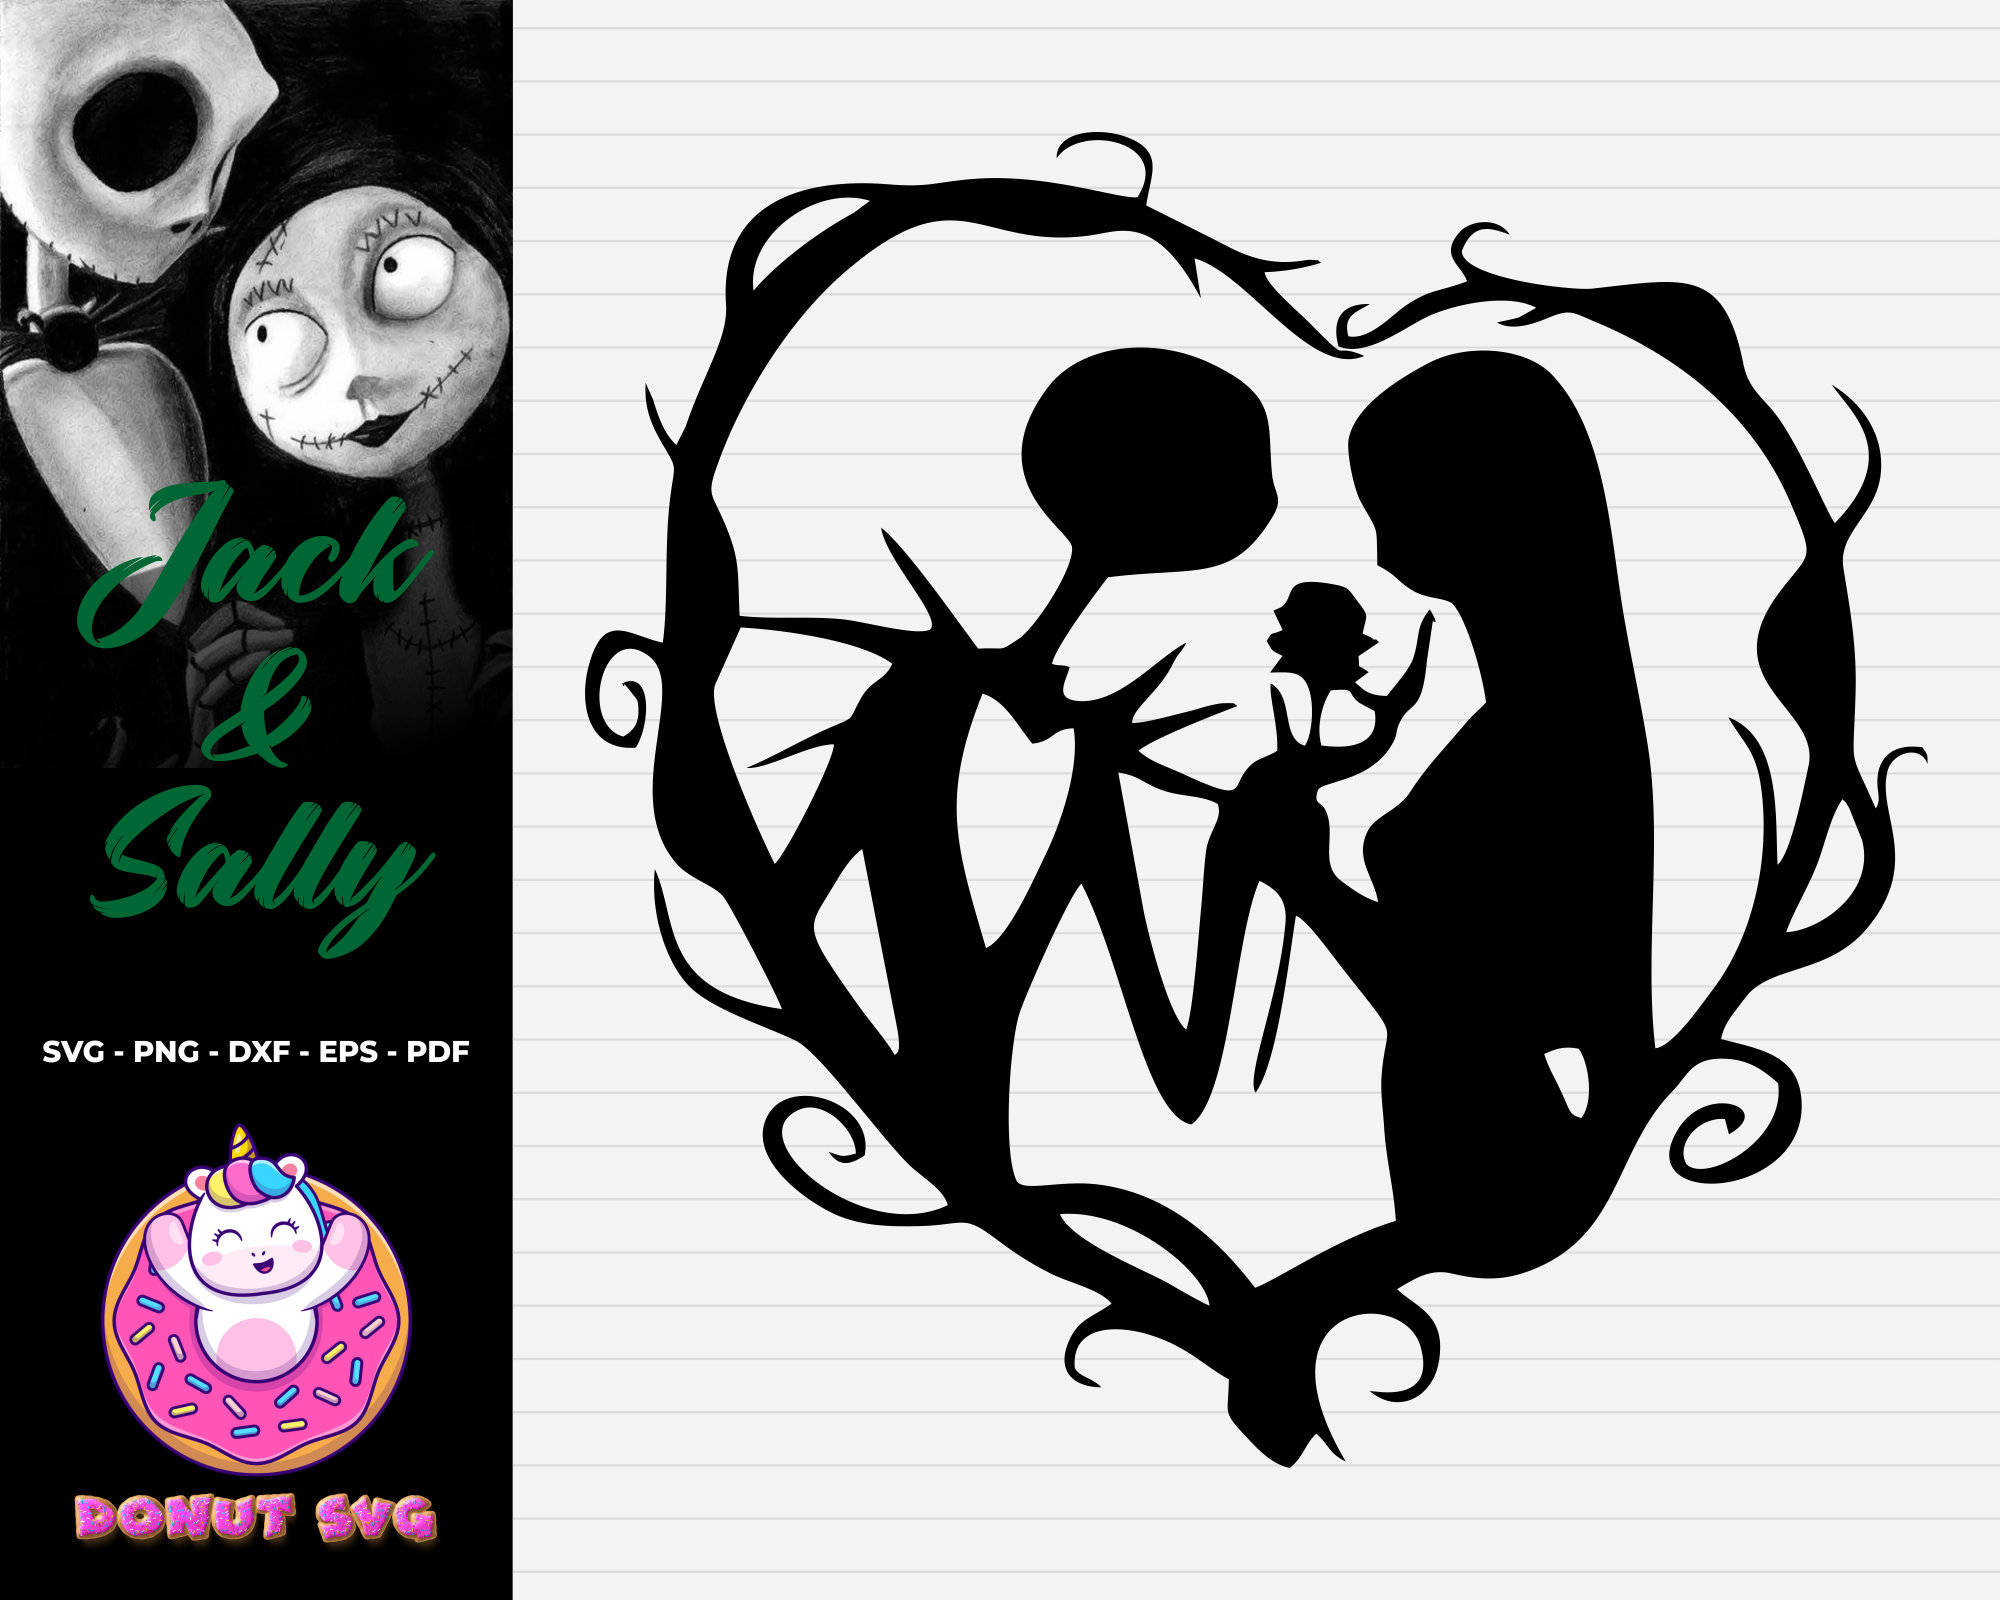 1. Jack and Sally Heart Tattoo Designs - wide 1